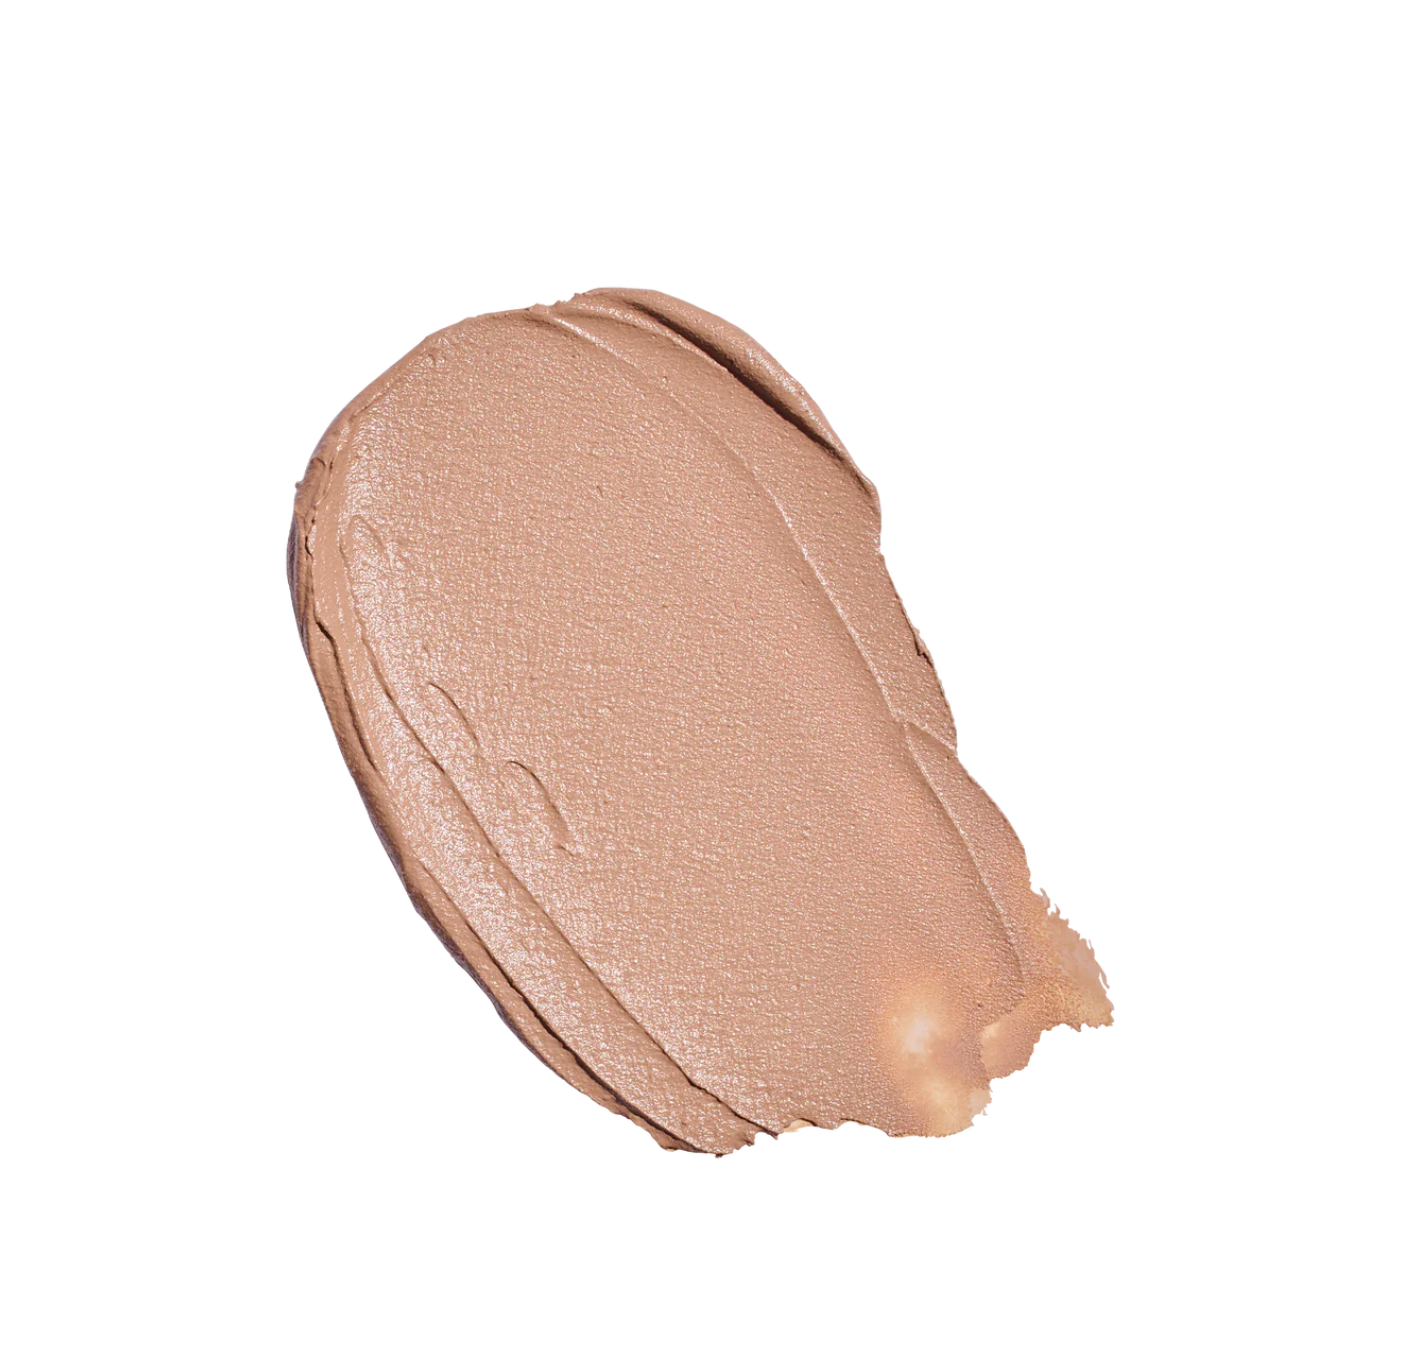 Colorescience Tint Du Soleil™ Whipped Mineral Foundation SPF 30